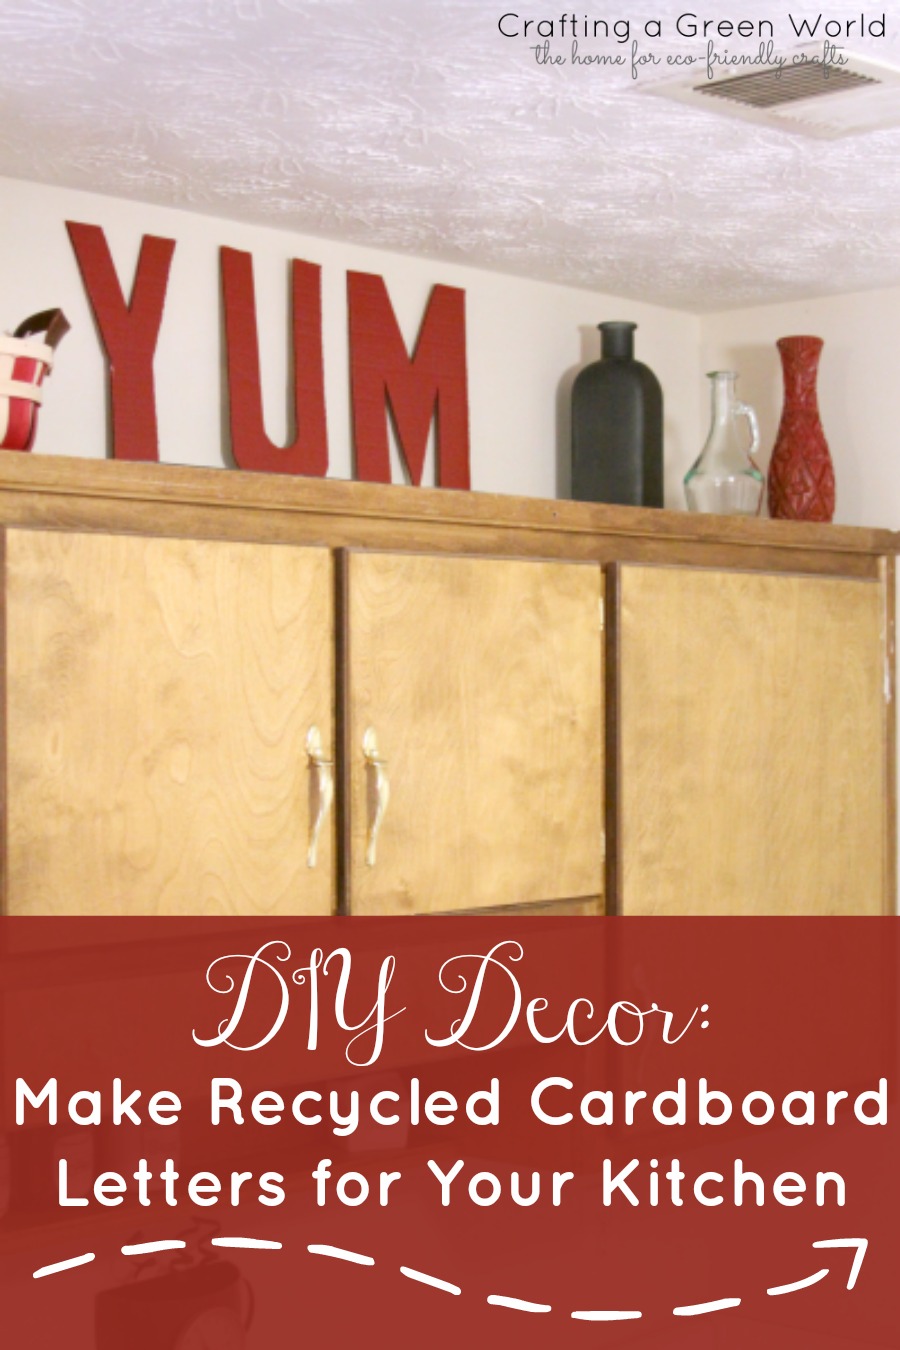 DIY Decor: Make Recycled Cardboard Letters for Your Kitchen